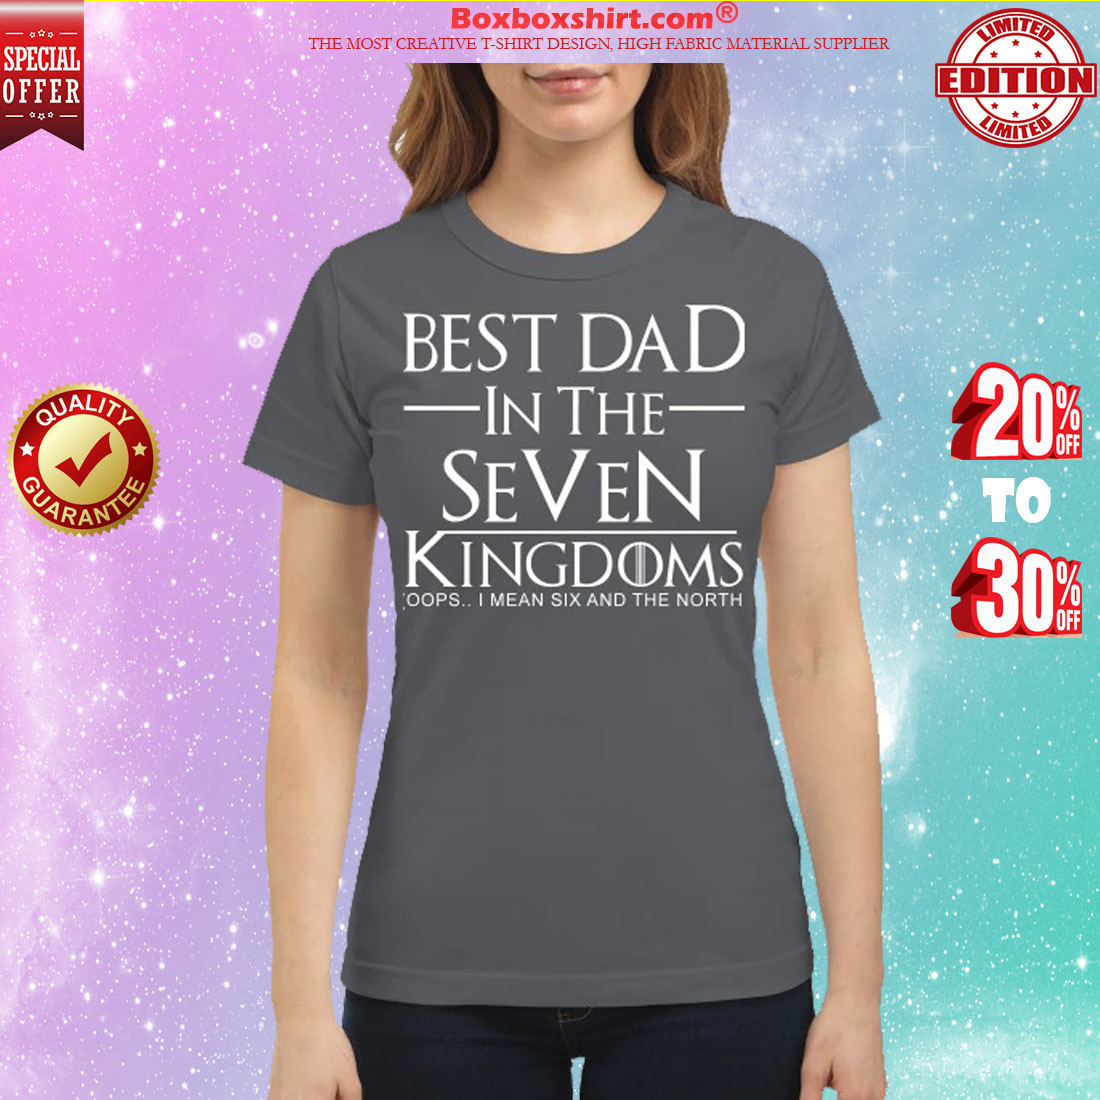 Game of Thrones best dad in the seven kingdoms classic shirt